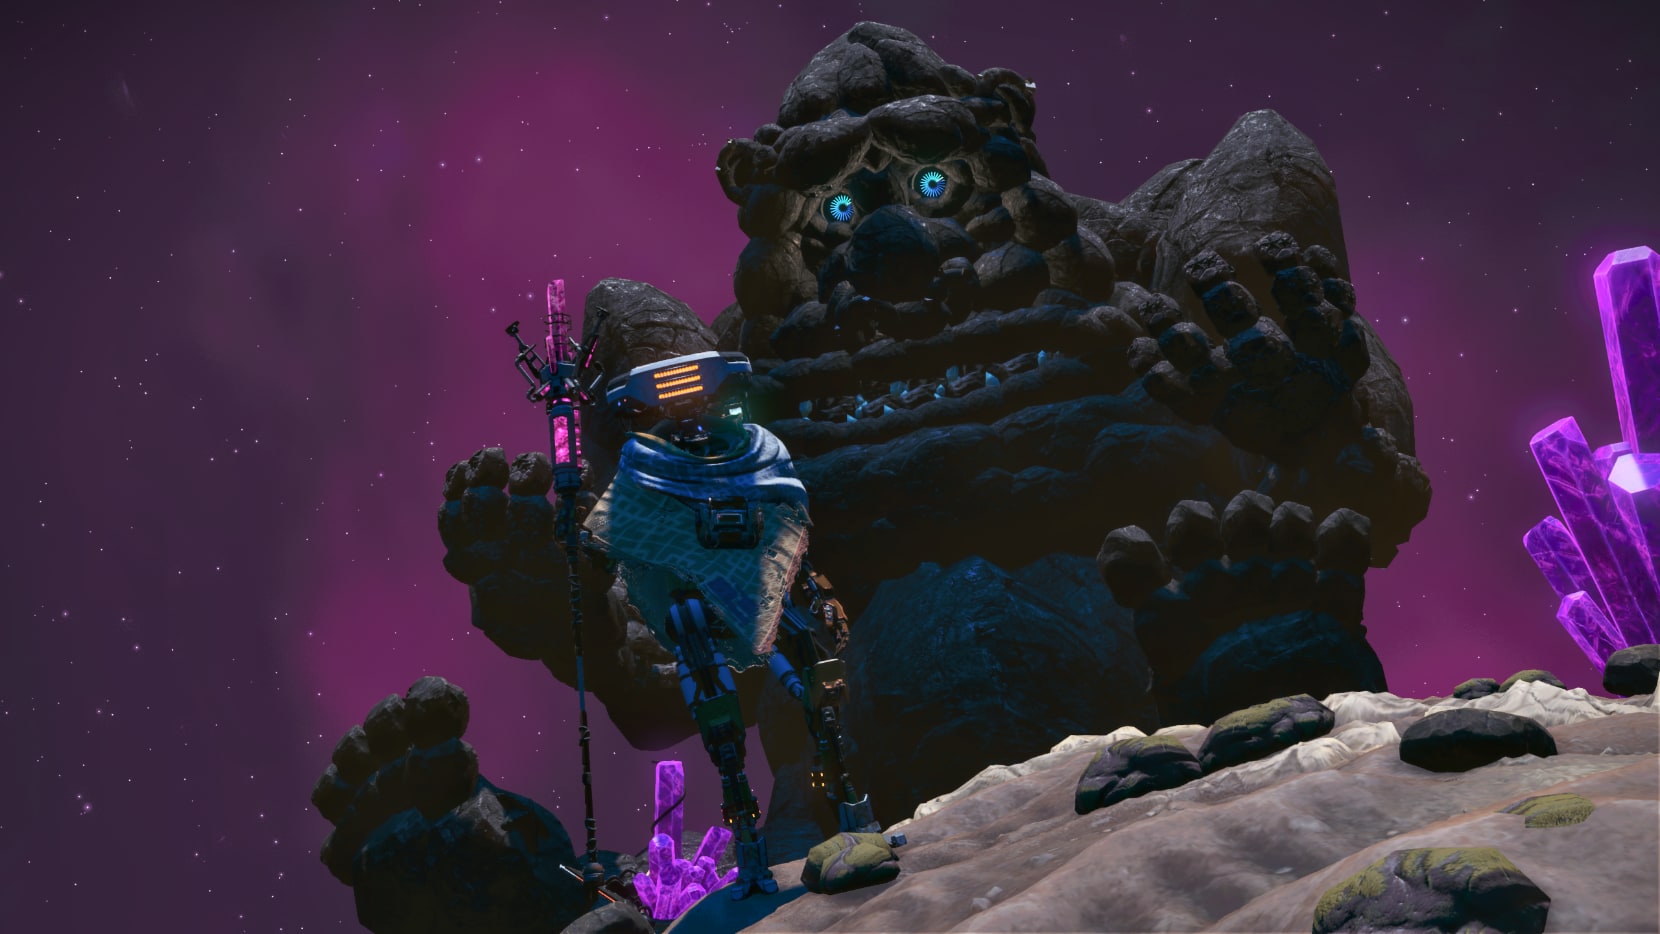 The Rockbiter from The NeverEnding Story, as a No Man's Sky base build